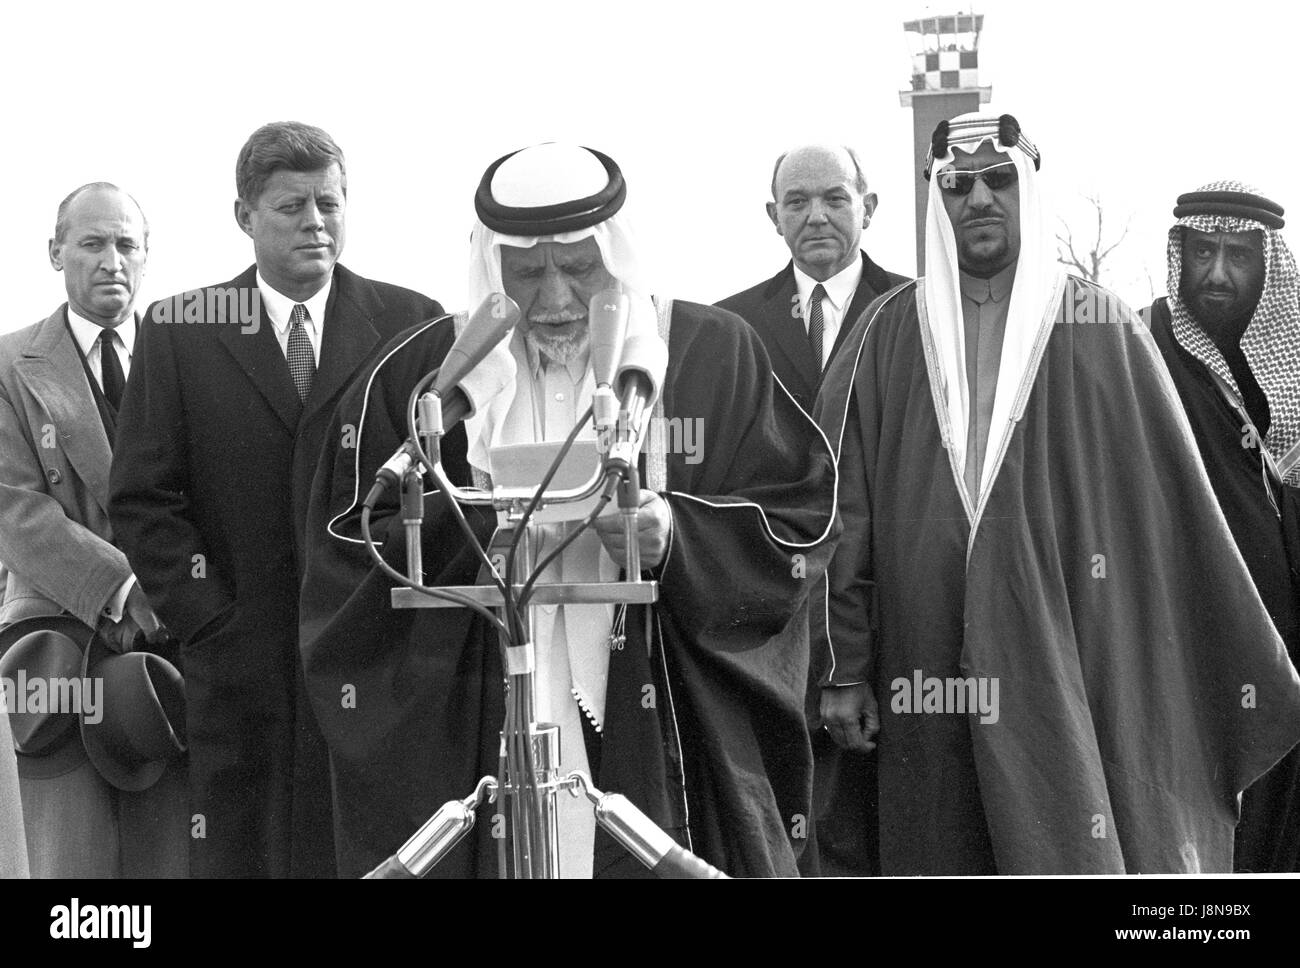 King Saud bin Abdulaziz Al Saud of Saudi Arabia makes remarks as he is welcomed to the United States by US President John F. Kennedy during a ceremony at Andrews Air Force Base, Maryland on February 13, 1962. From left to right: unidentified, President Kennedy, King Saud, US Secretary of State Dean Rusk, unidentified, and unidentified. Credit: Arnie Sachs/CNP /MediaPunch Stock Photo